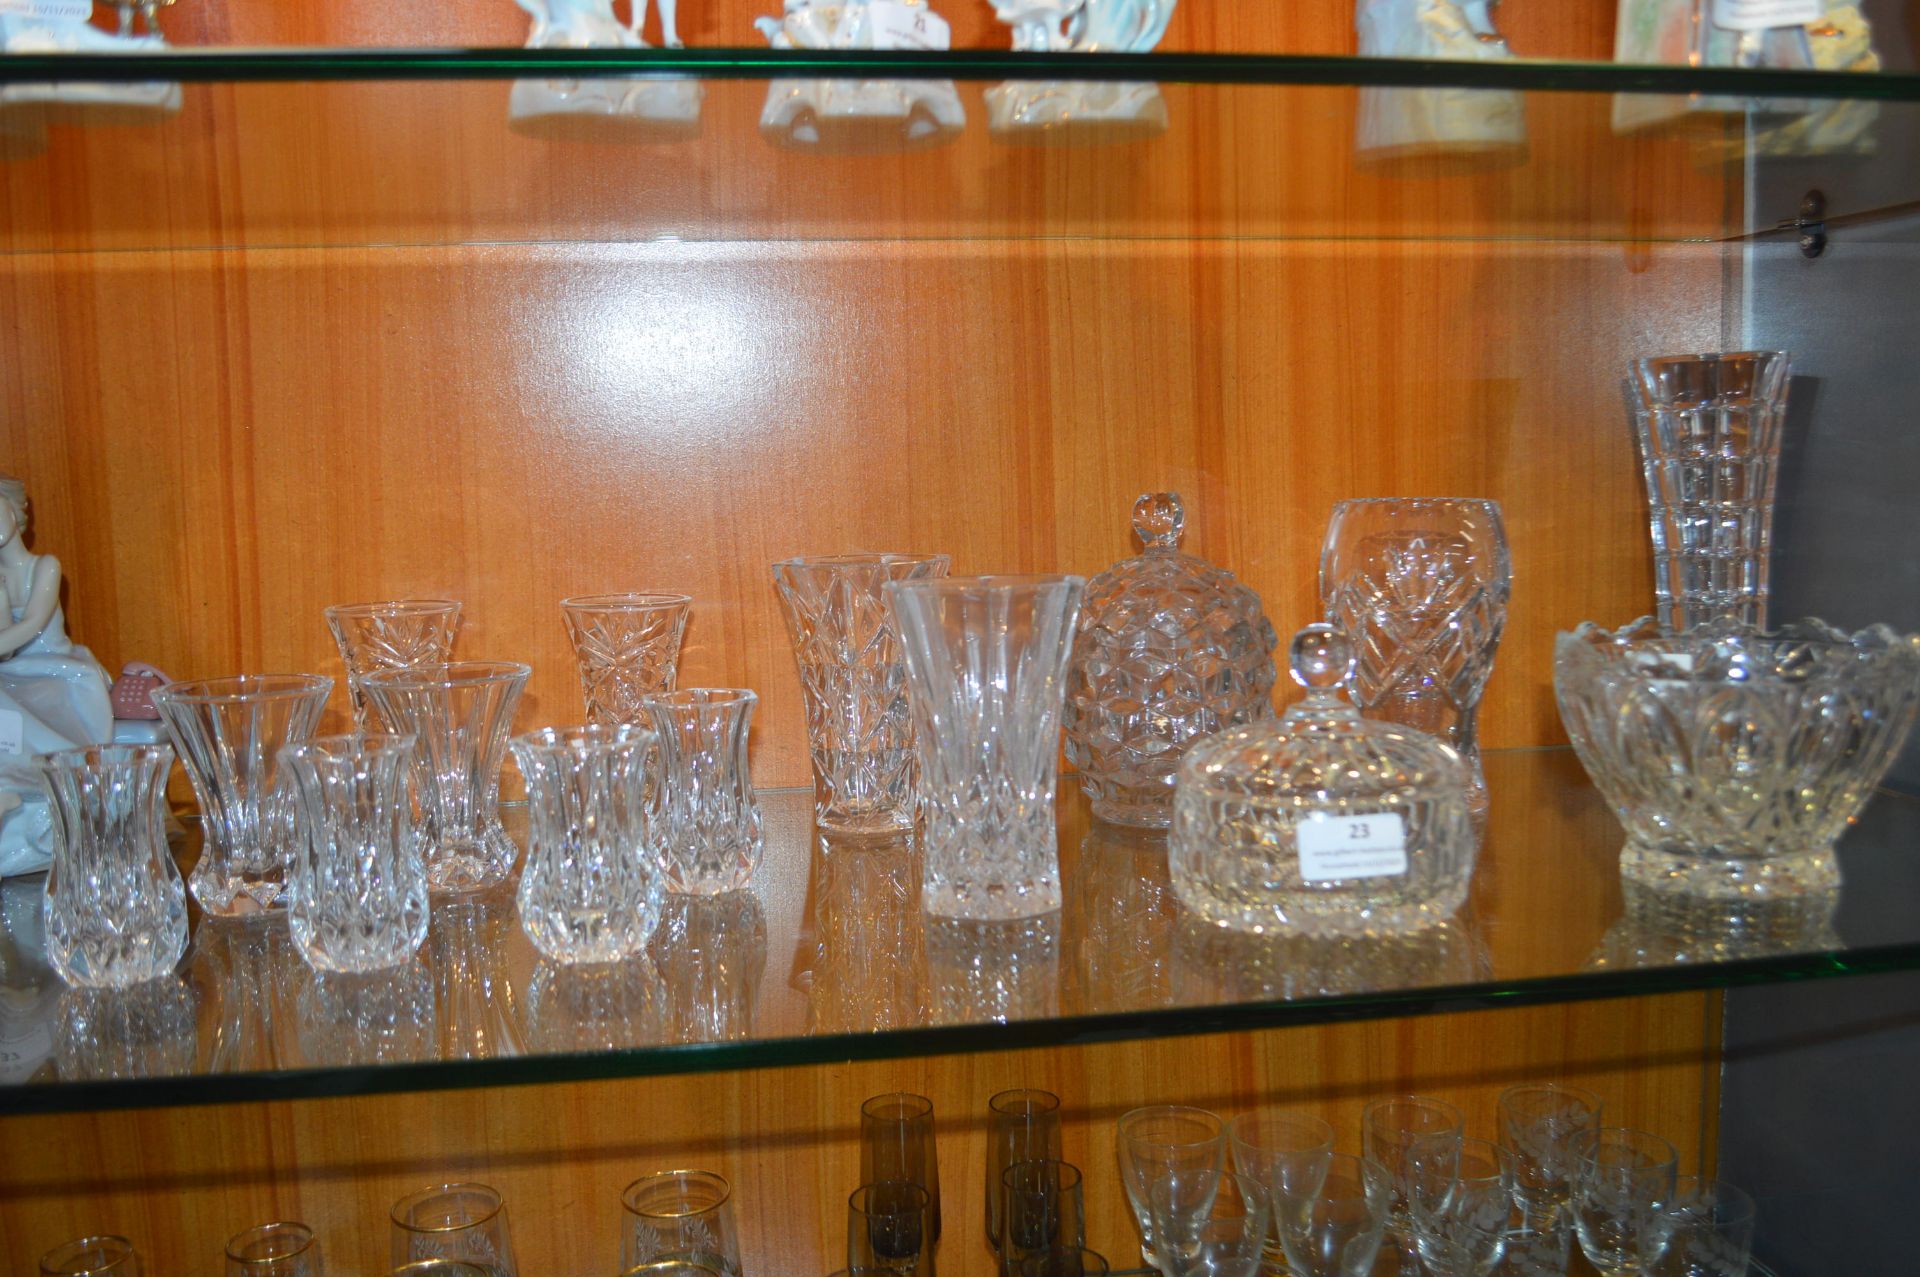 Cut Lead Crystal Glassware Including Vases, Dishes